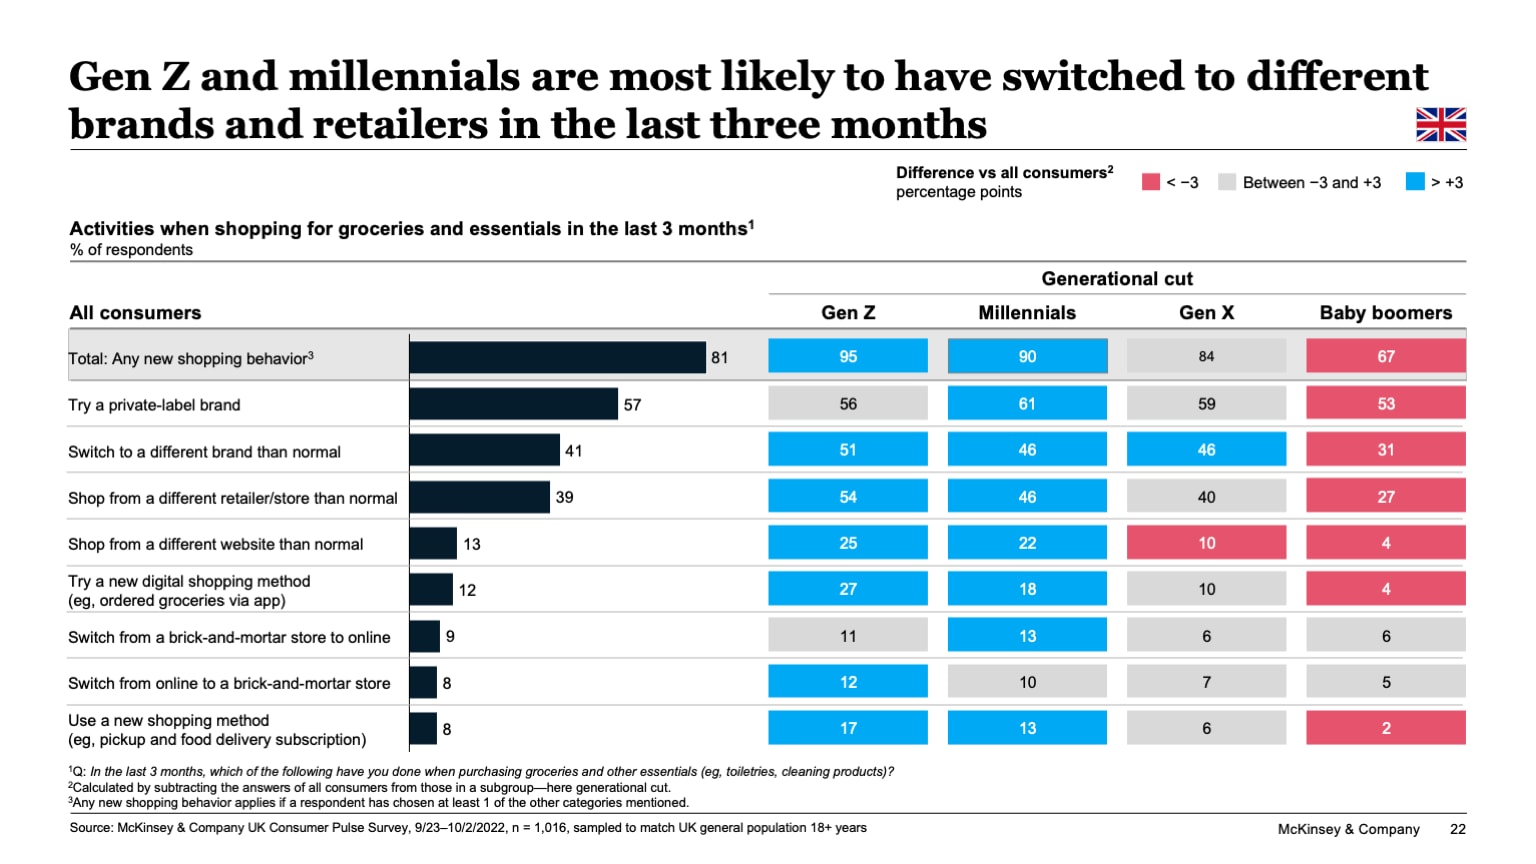 Gen Z and millennials are most likely to have switched to different brands and retailers in the last three months